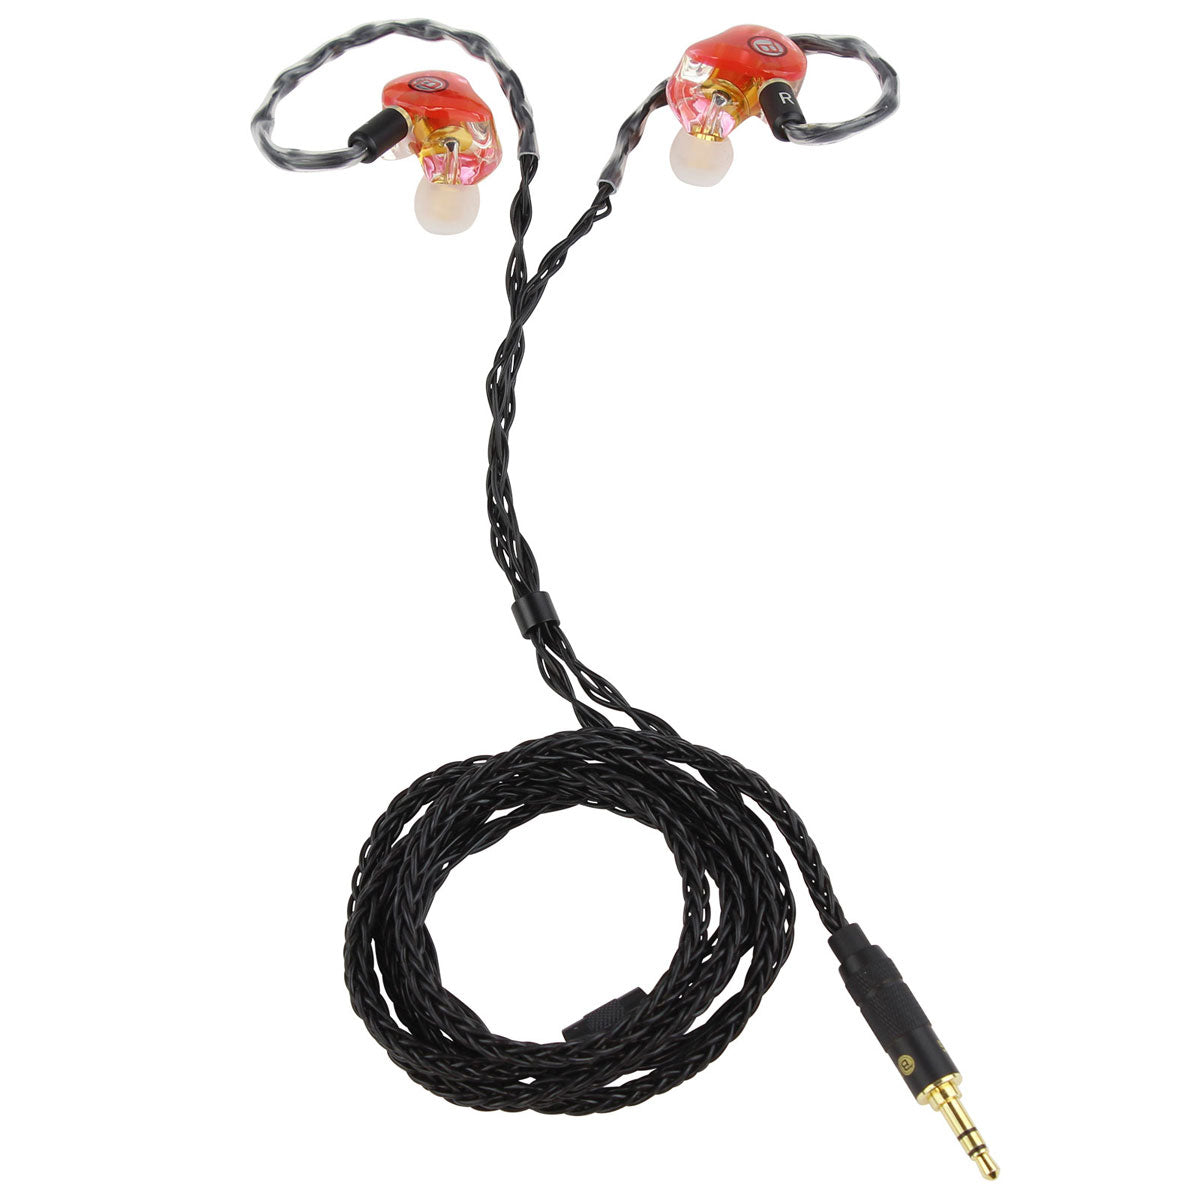 Blastking EARBUDS-8017-RED Professional In-Ear Monitors - Translucent Red